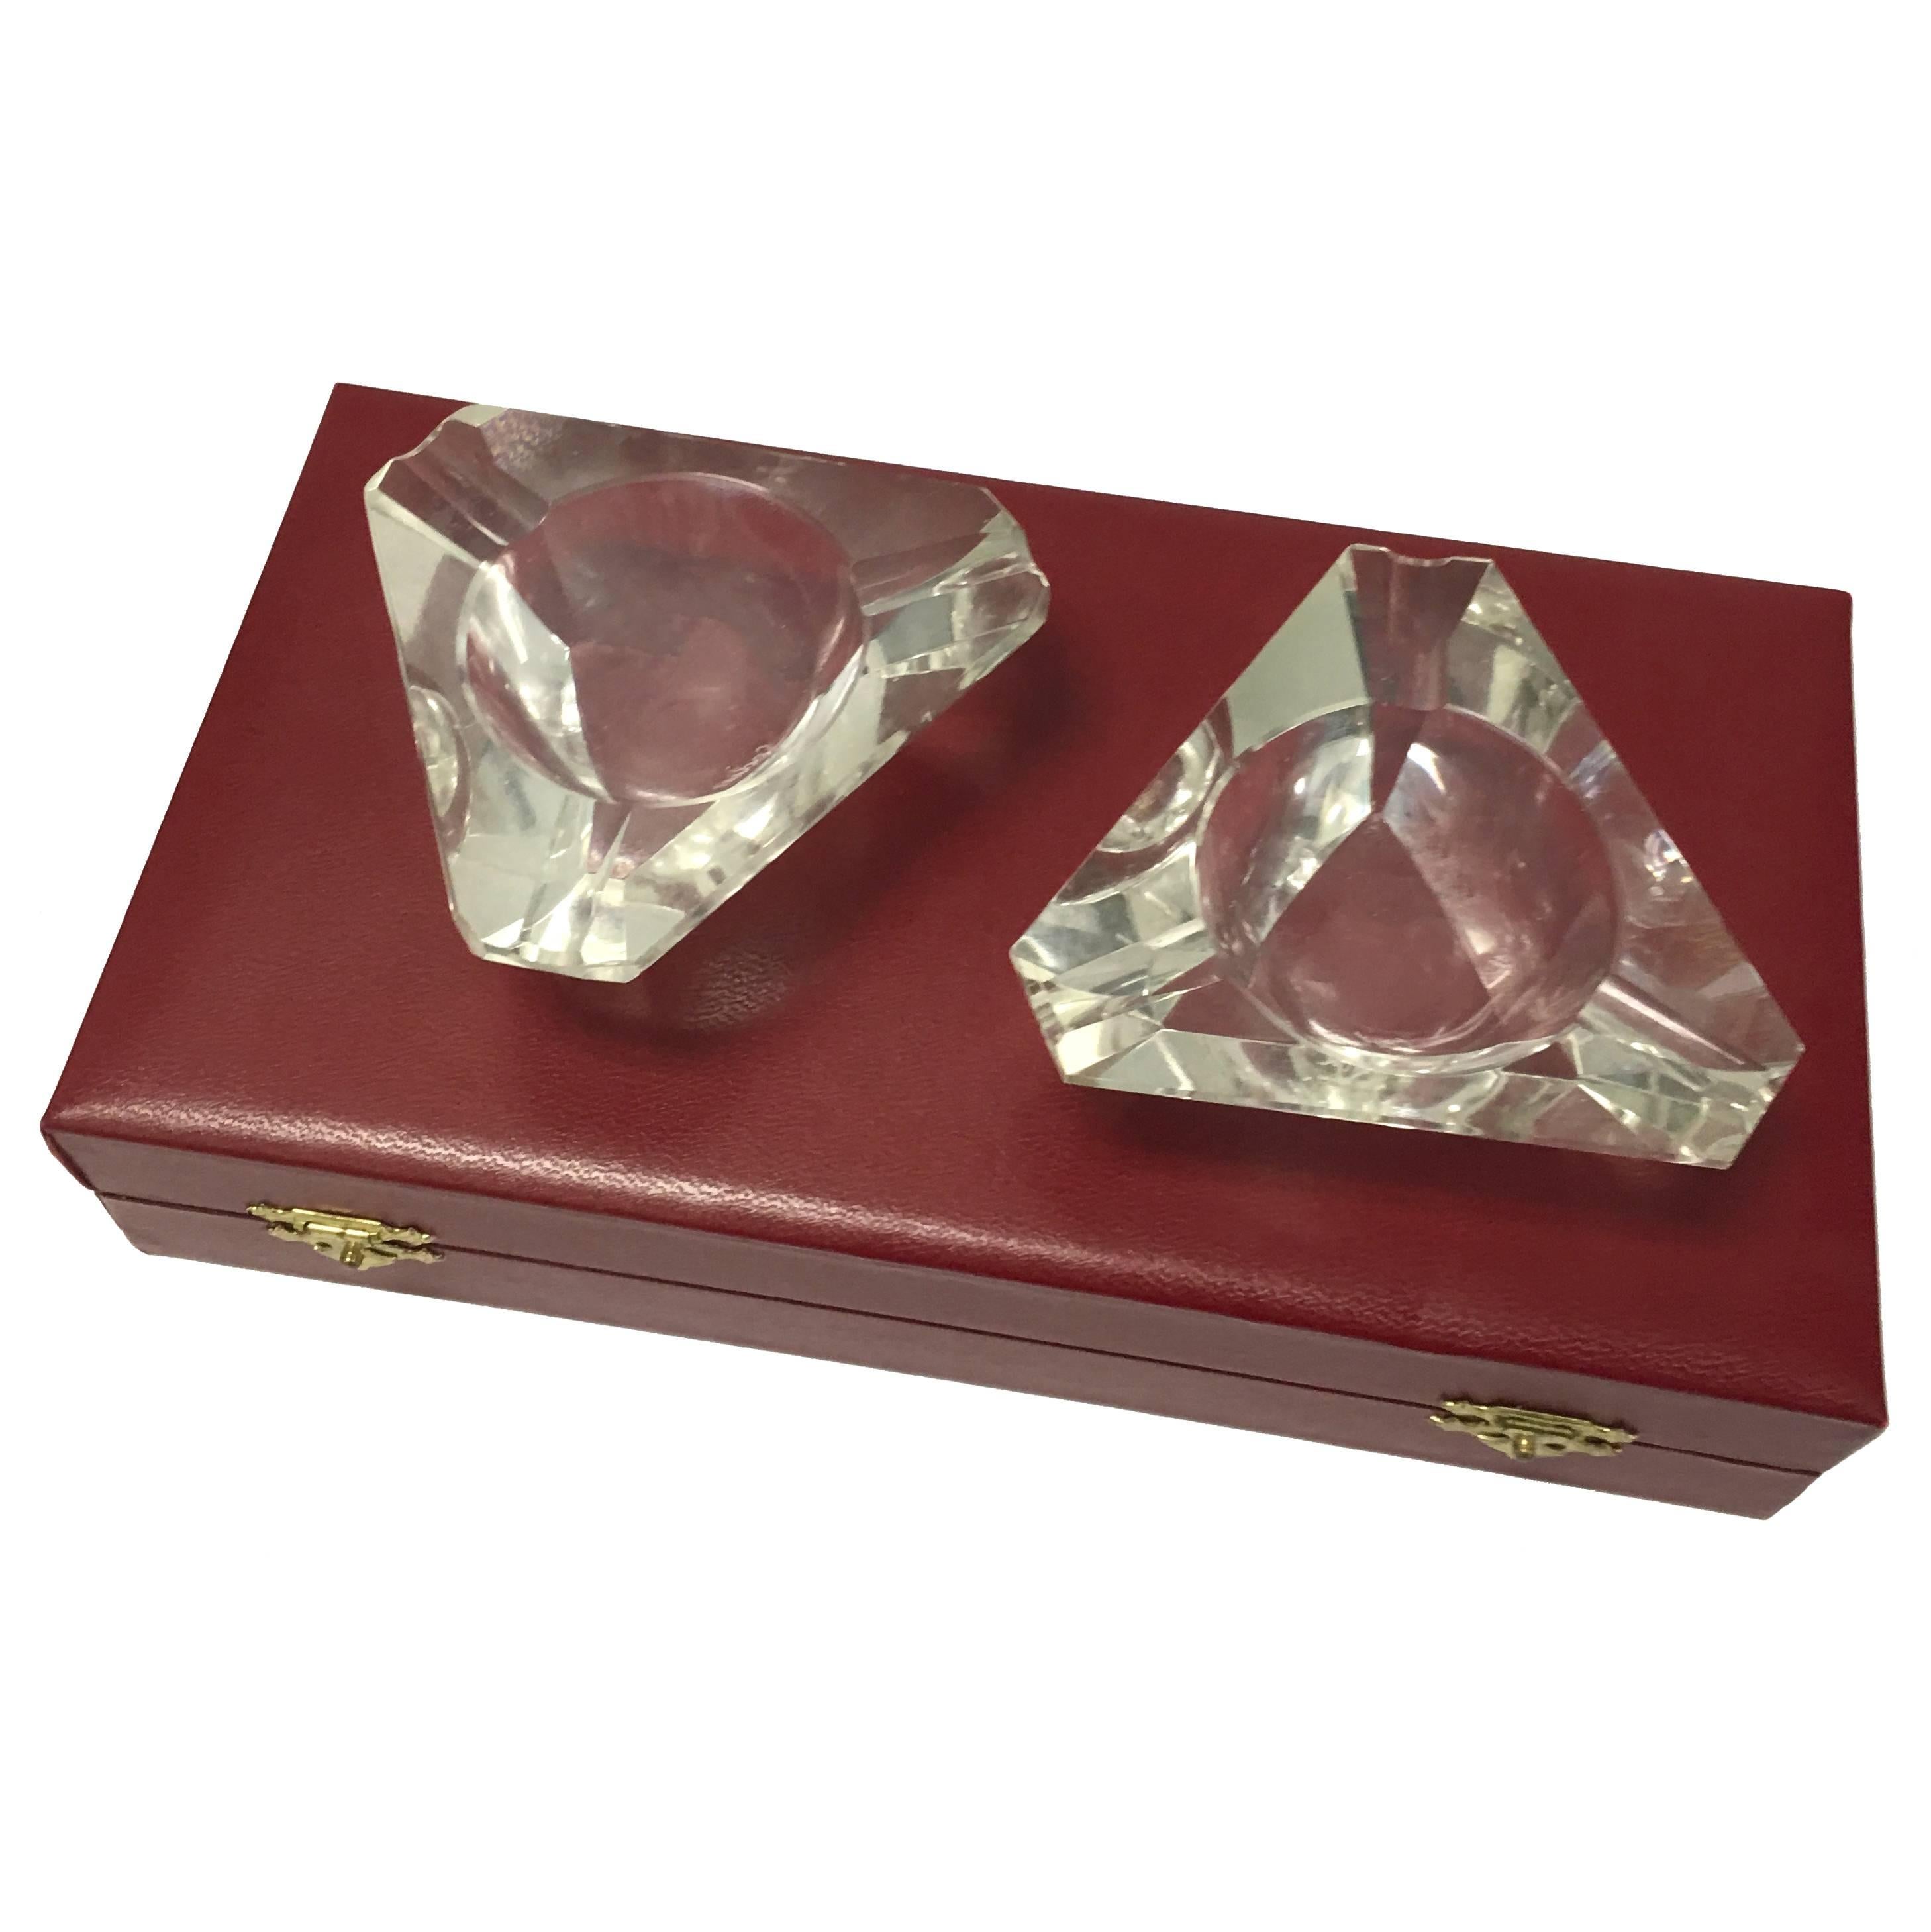 Pair of Cartier Crystal Ashtrays in Red Cartier Box